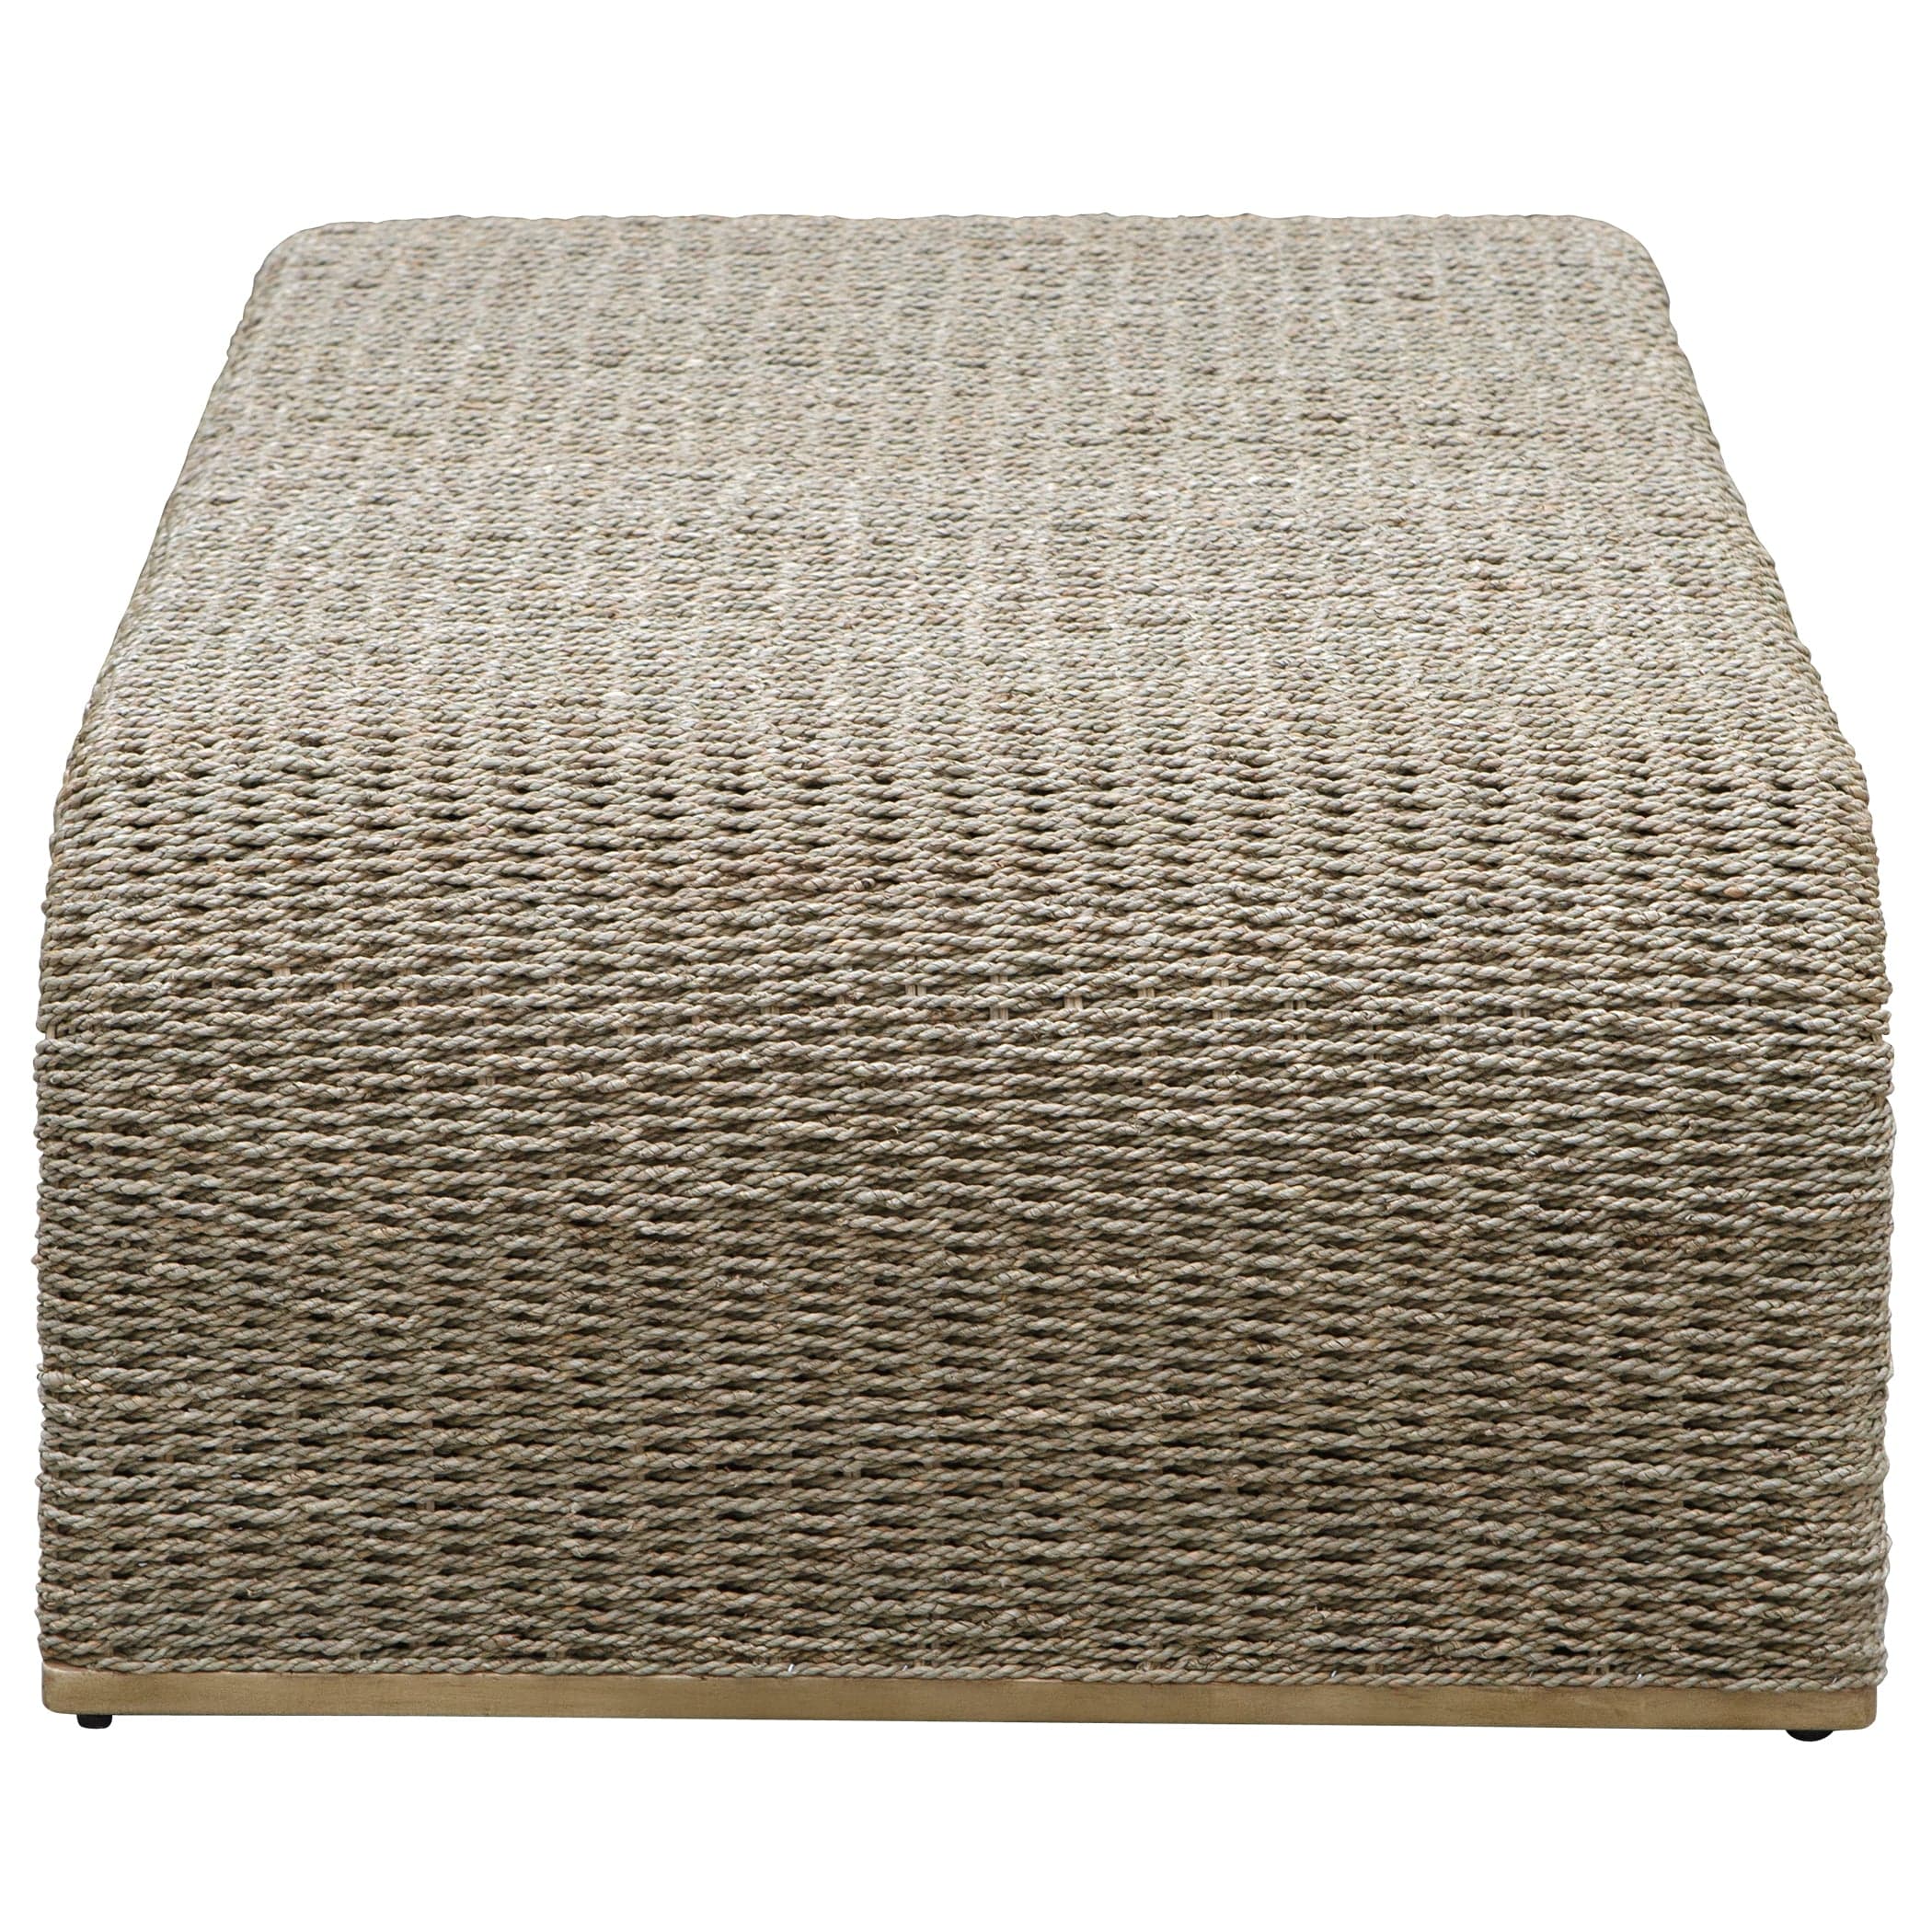 Calabria Woven Seagrass Coffee Table Uttermost